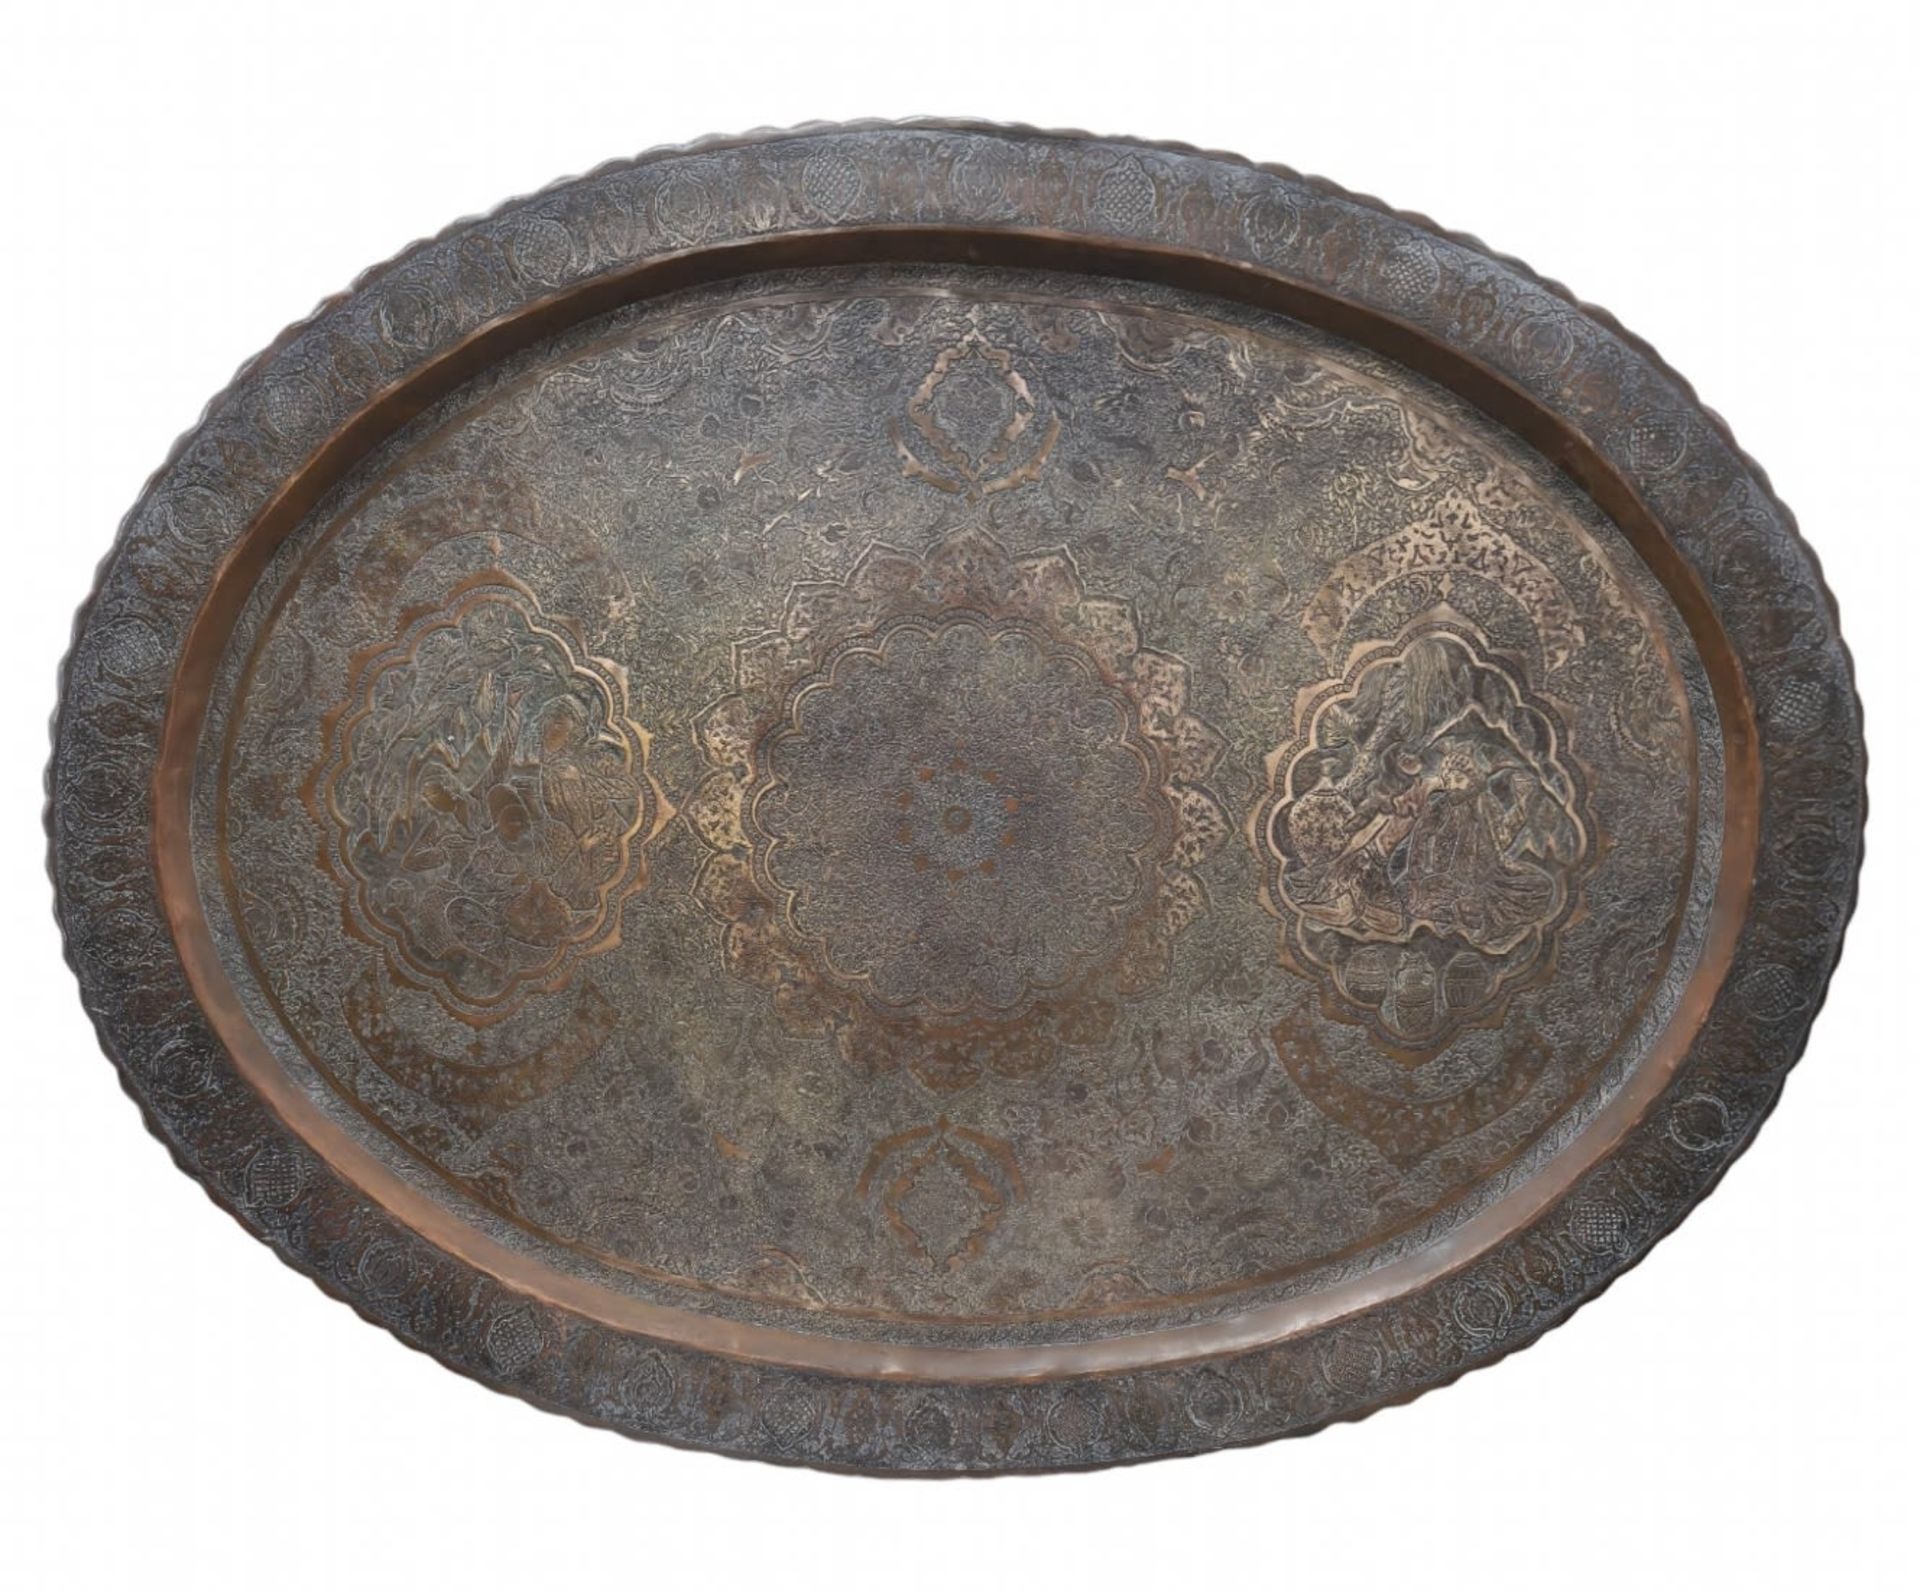 An antique and large Islamic tray made of copper, decorated with manual embroidery work in a dense